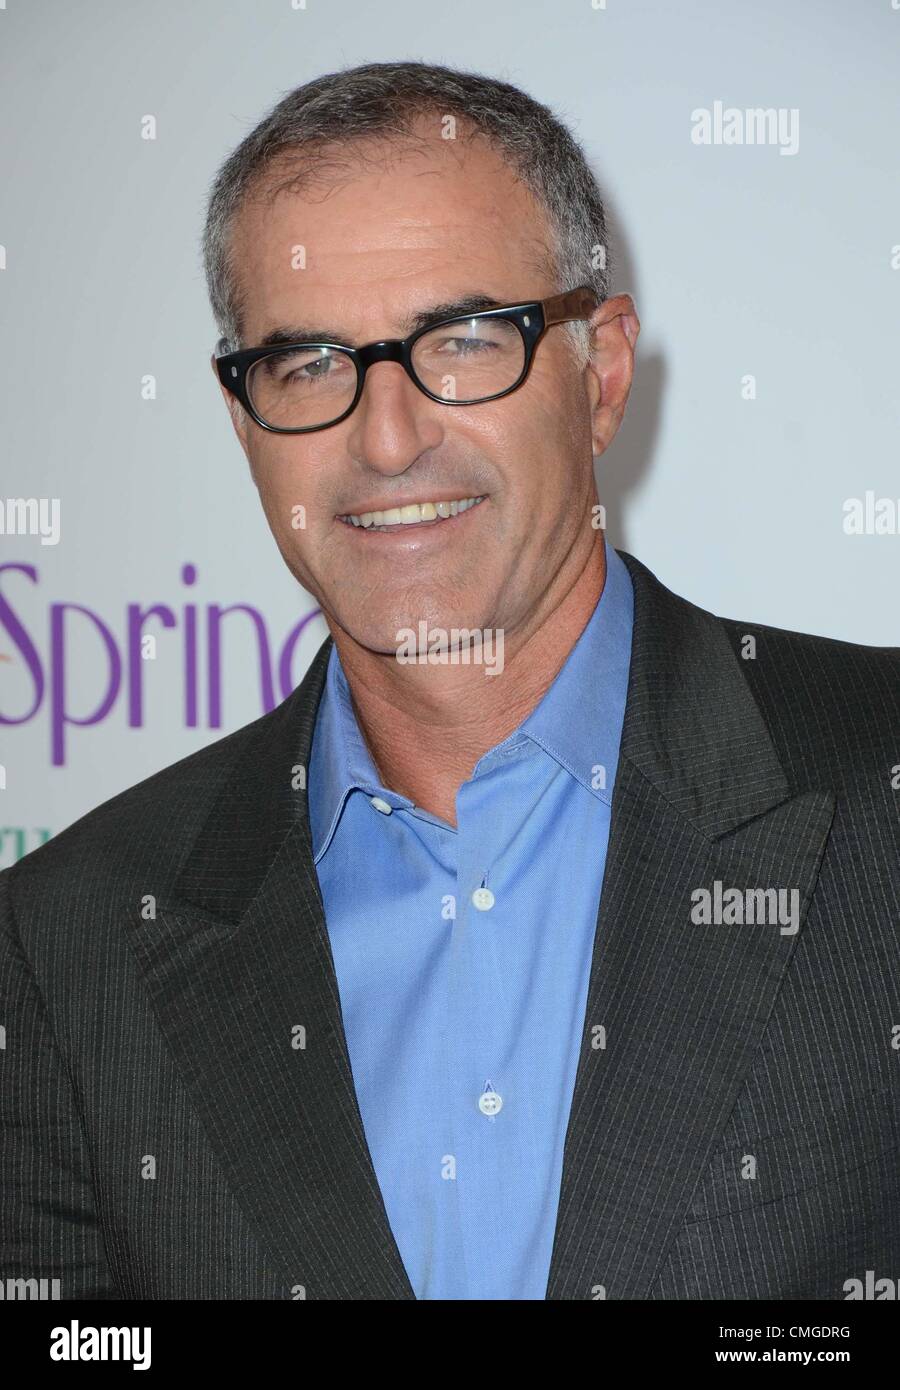 USA. David Frankel at arrivals for HOPE SPRINGS Premiere, School of Visual Arts (SVA) Theater, New York, NY August 6, 2012. Photo By: Derek Storm/Everett Collection Stock Photo